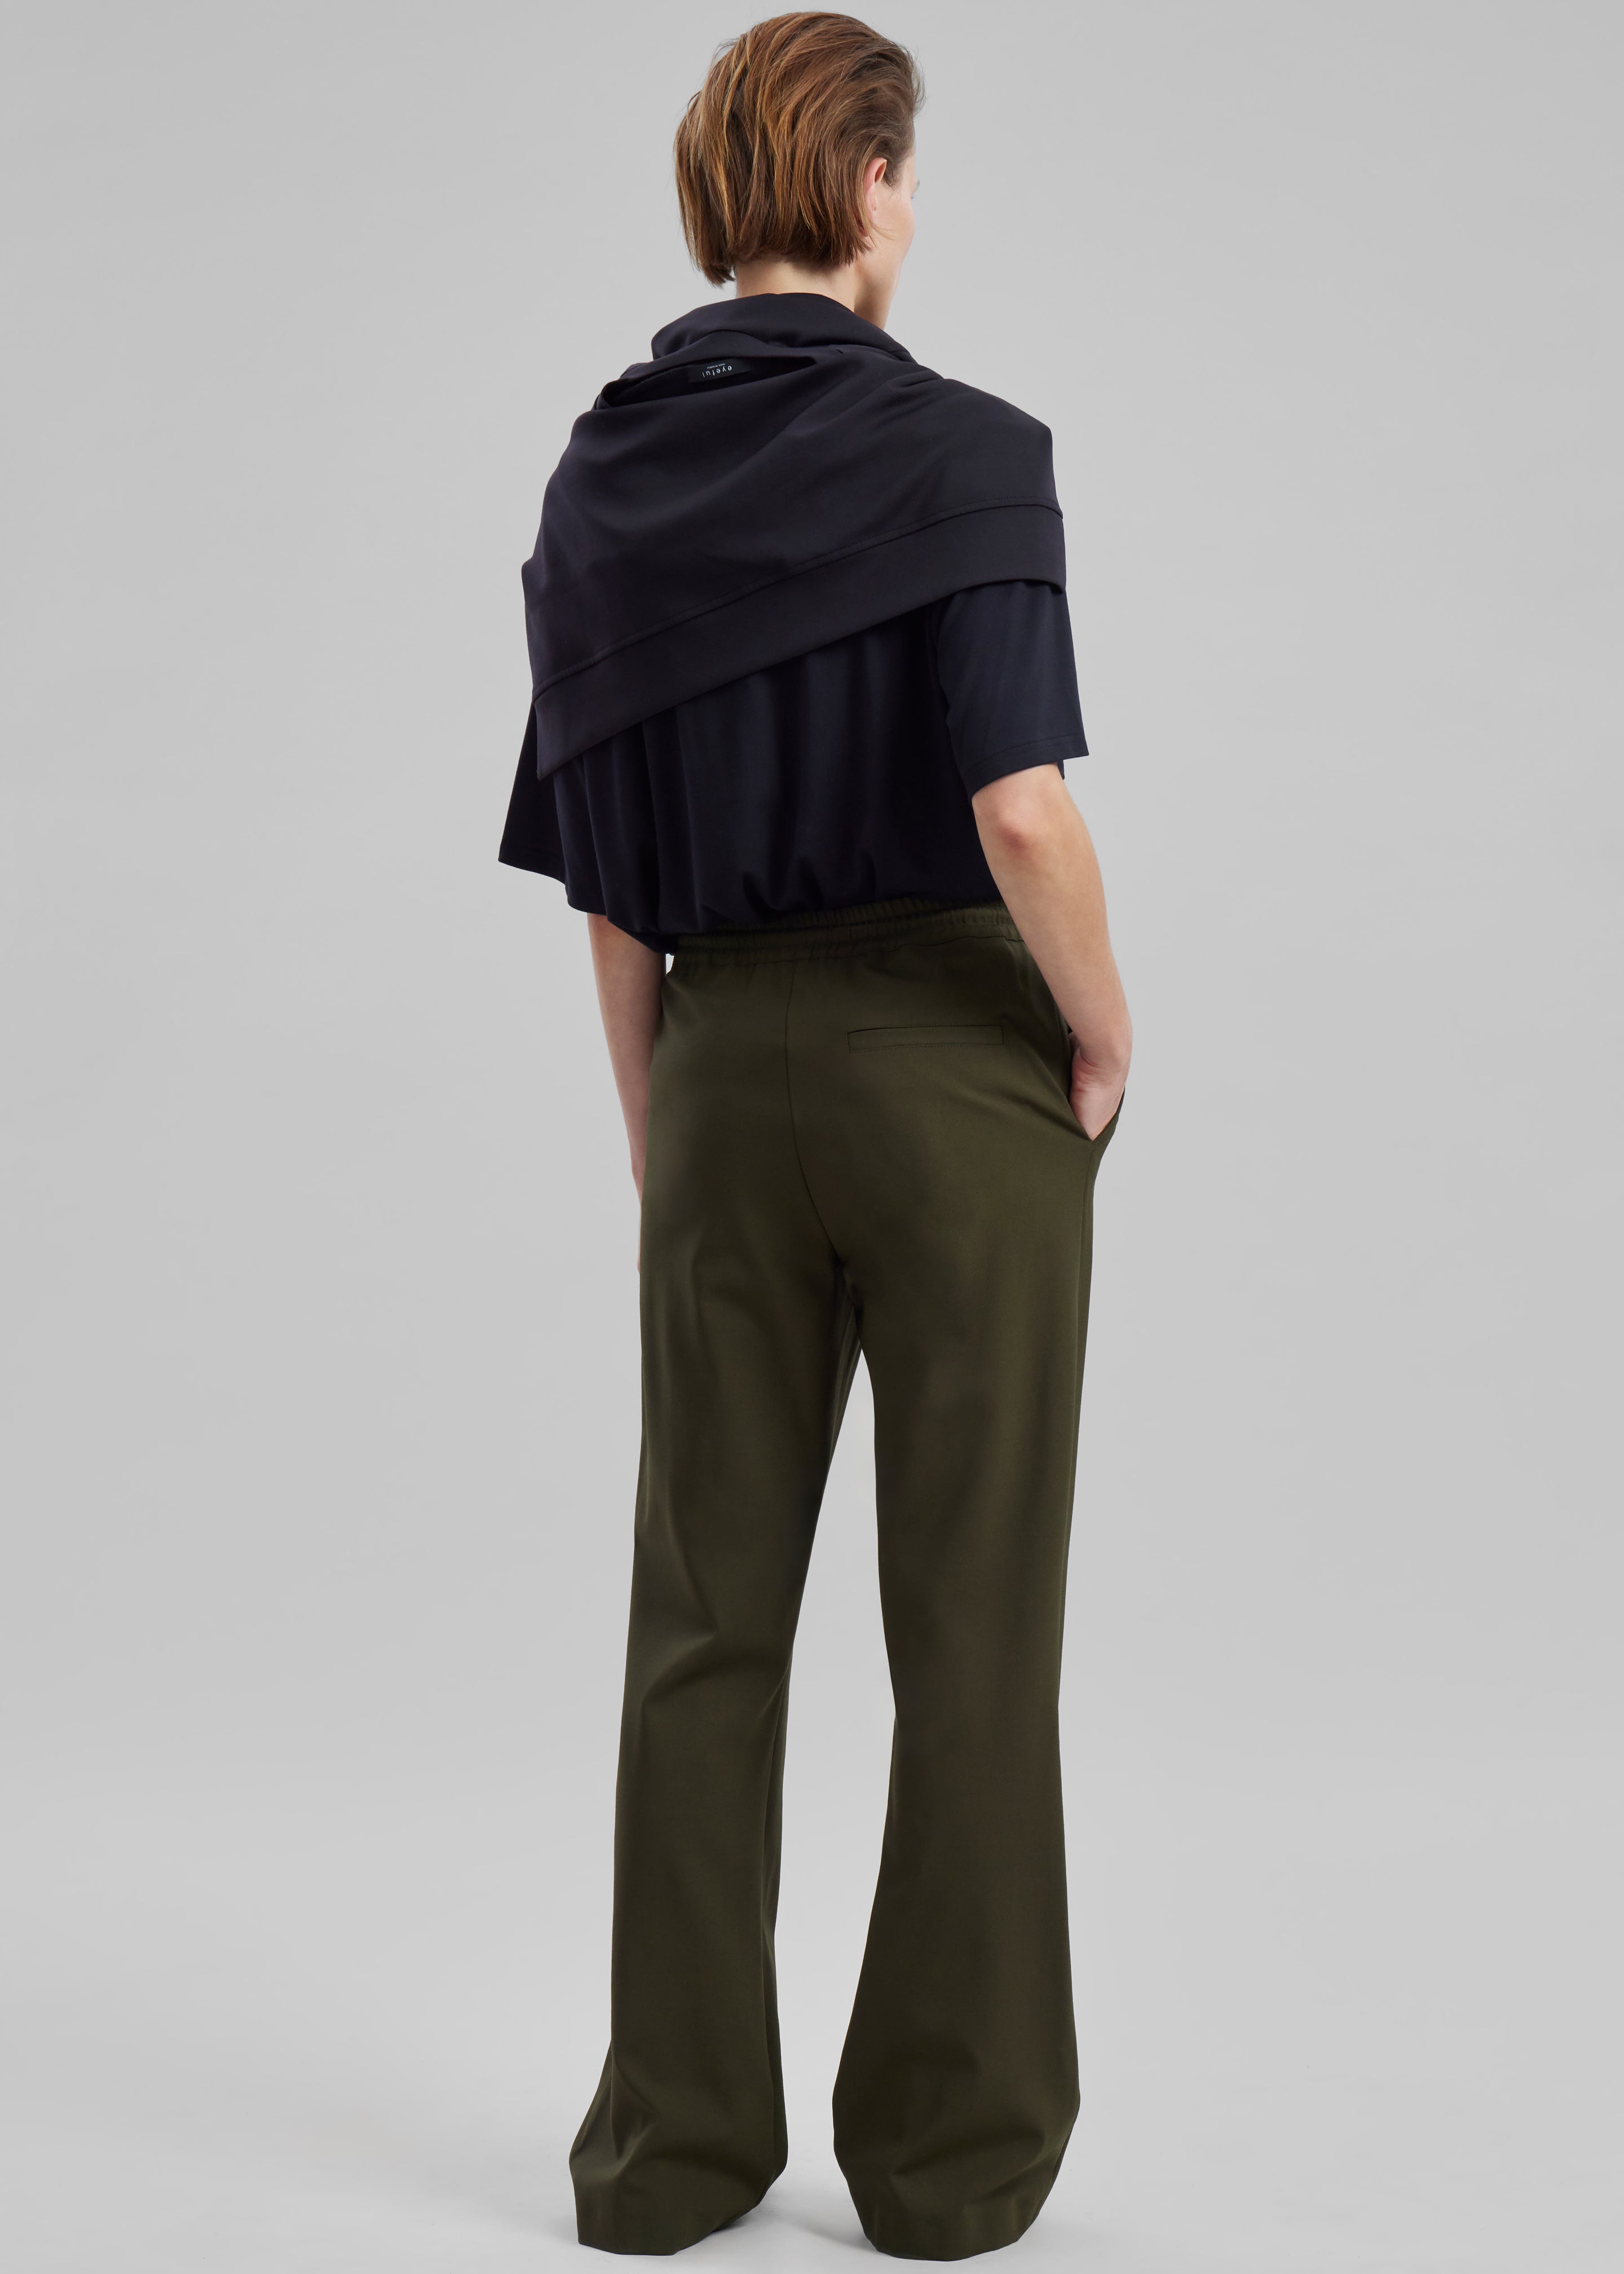 JW Anderson Drawstring Waist Tailored Trousers - Olive - 9